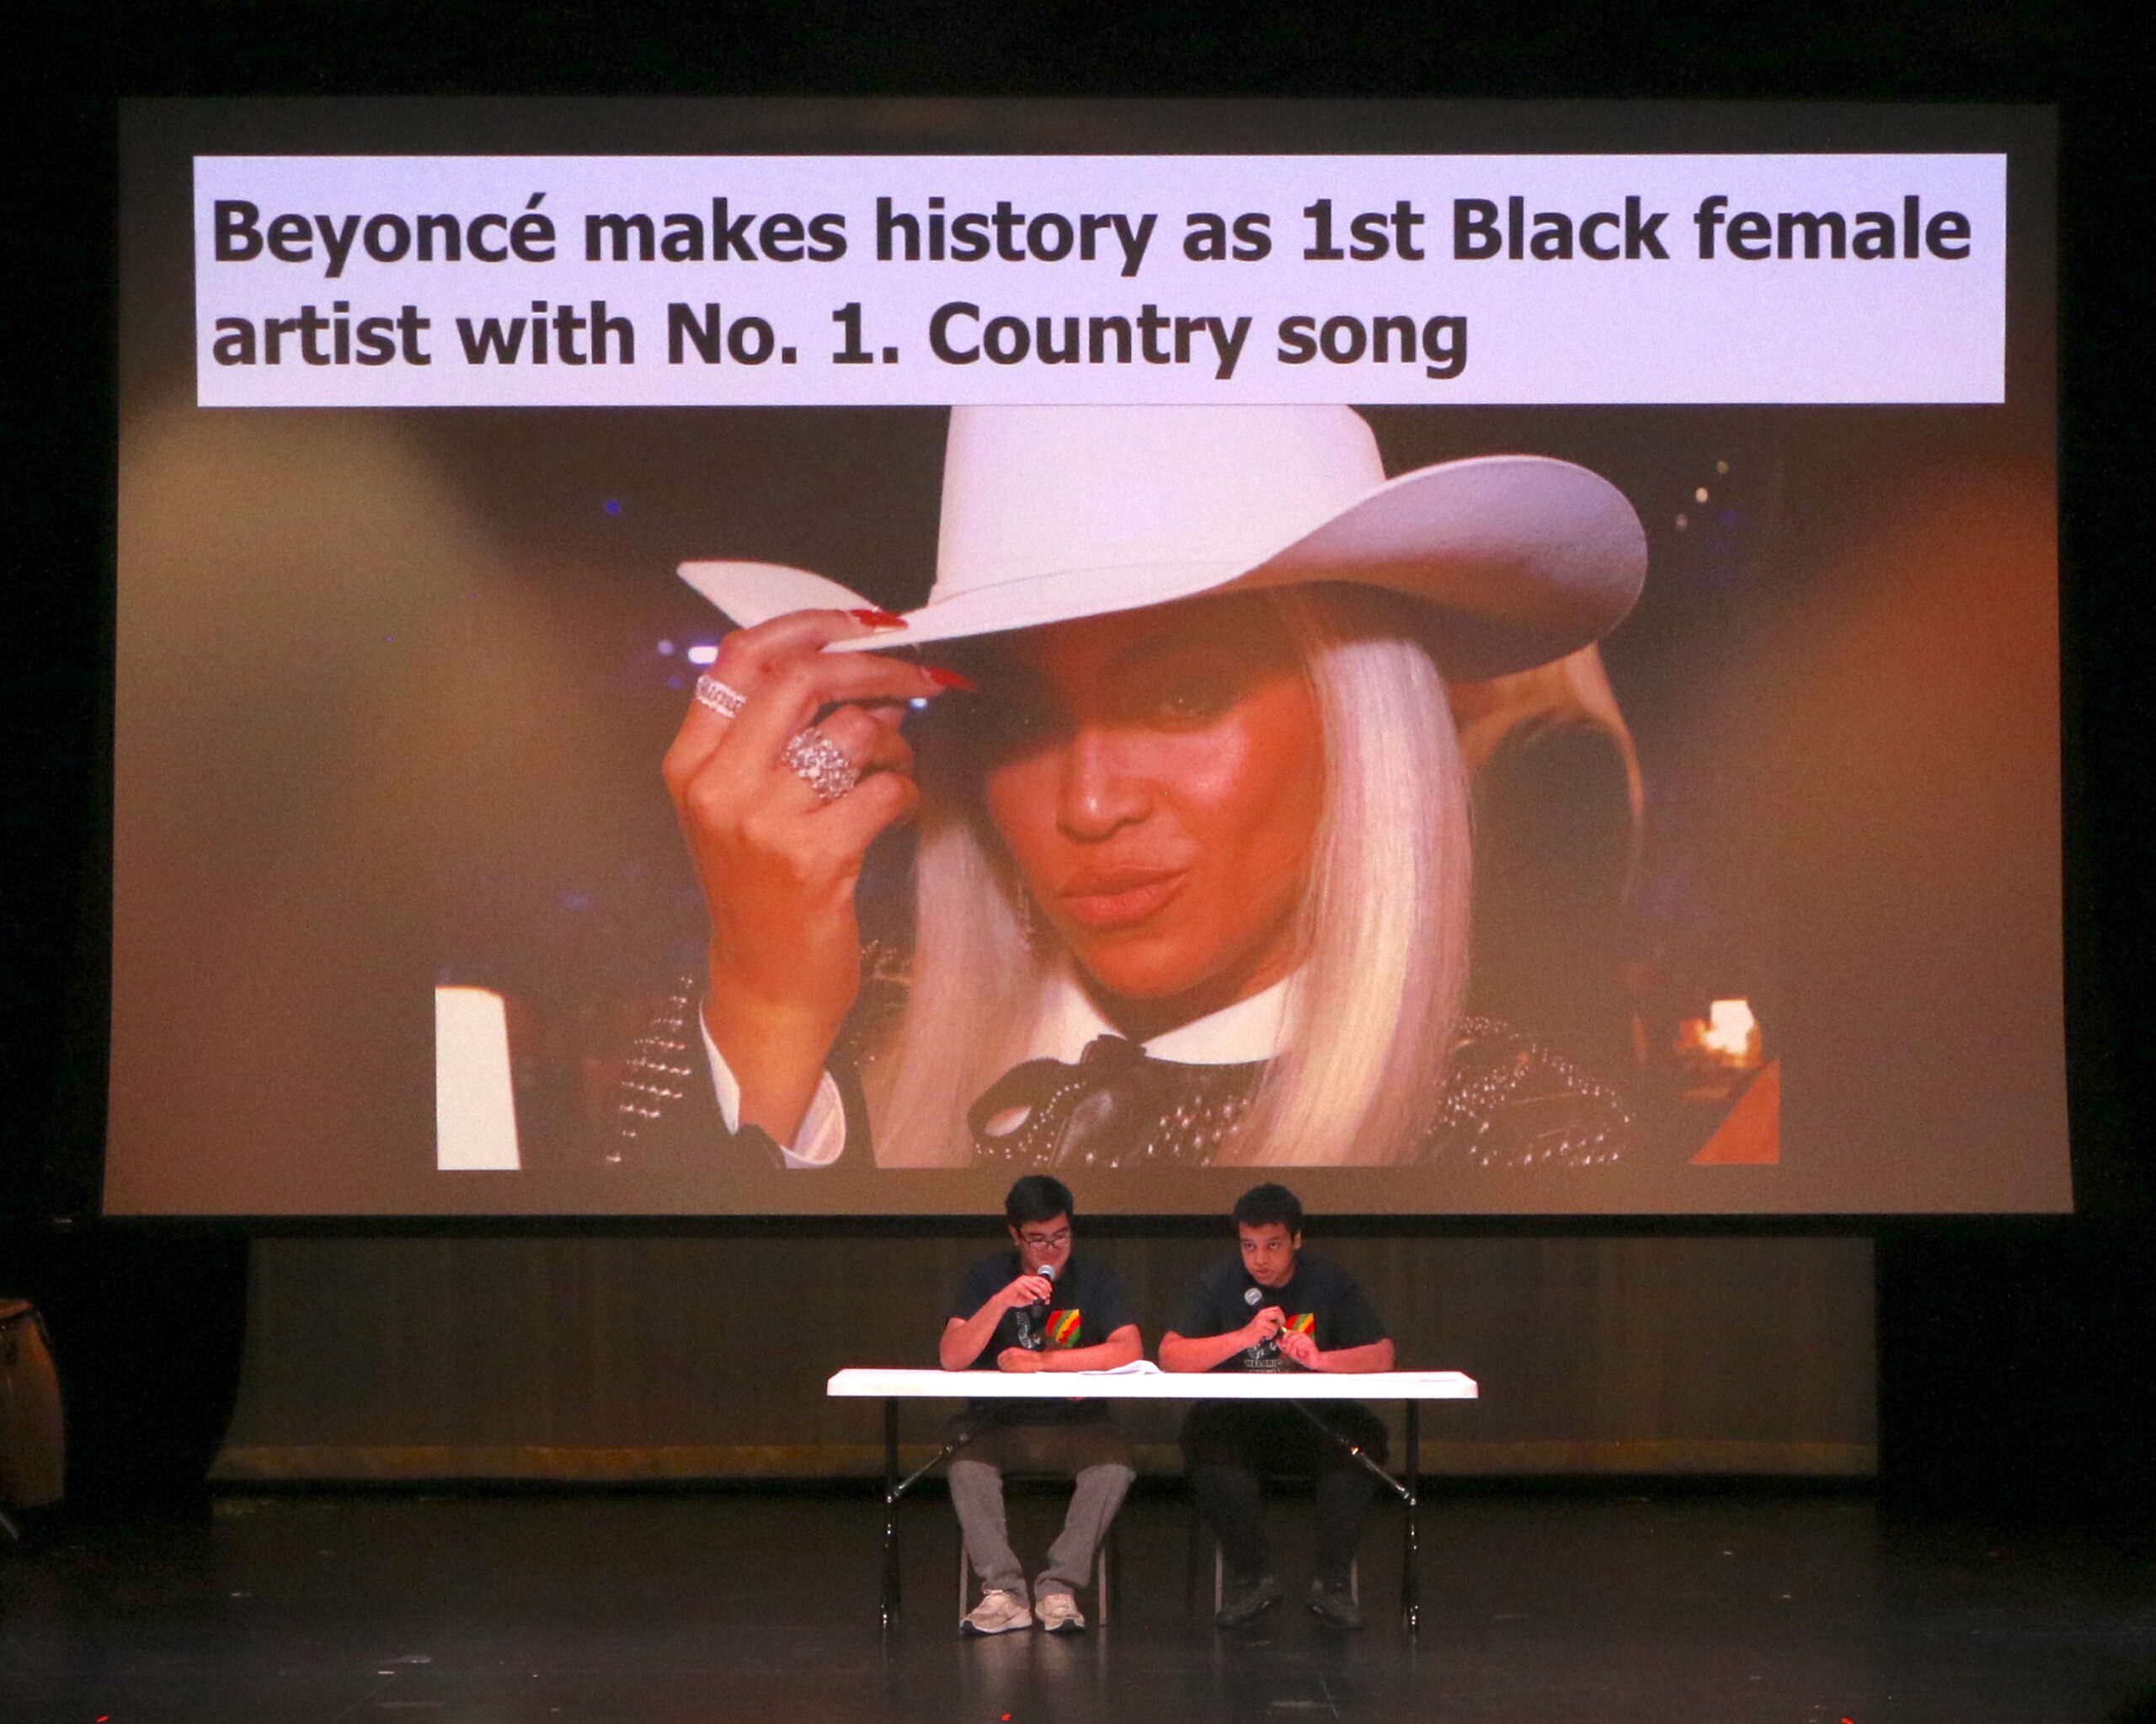 Students discussing Beyonce and country music